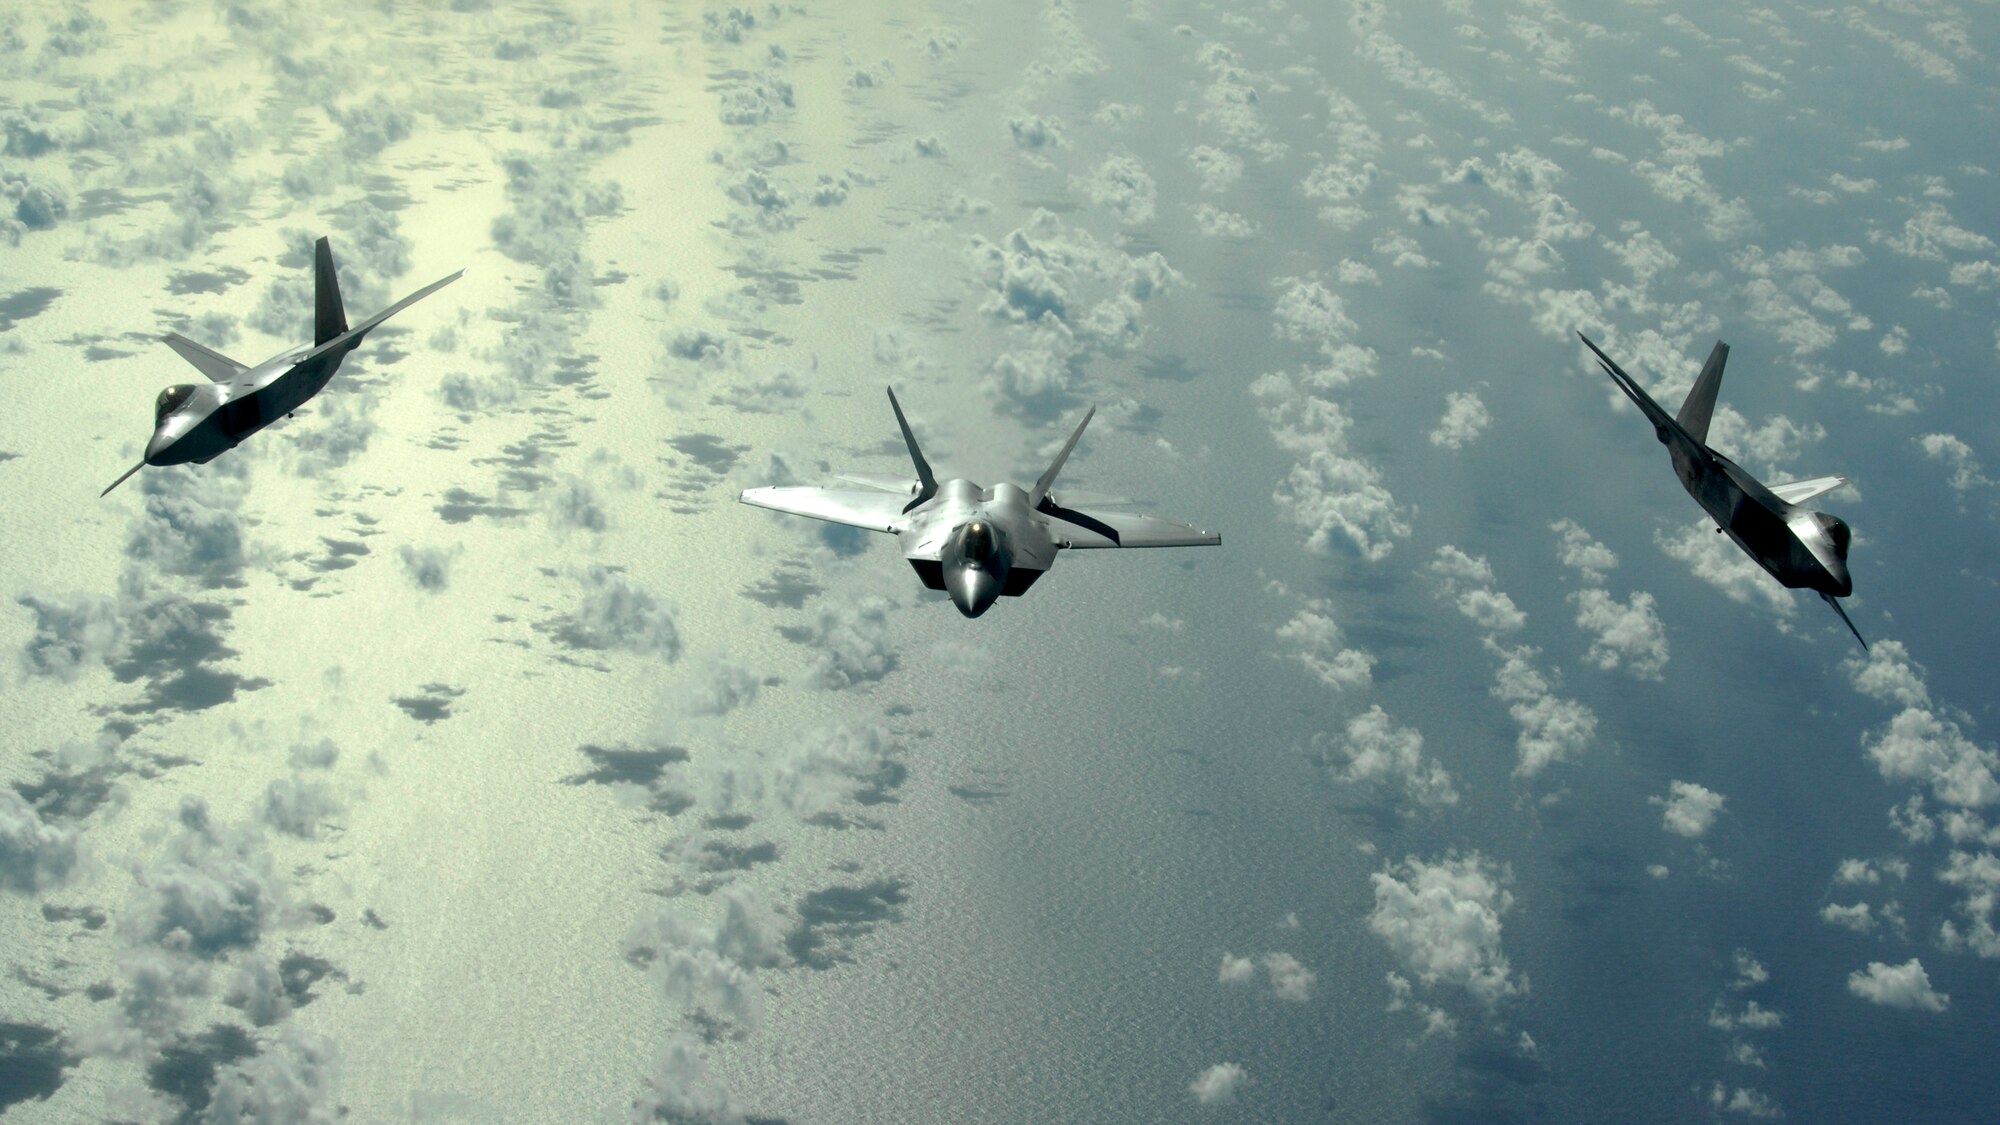 ANDERSEN AIR FORCE BASE, Guam - A three-ship of F-22 Raptors fly over the Pacific Ocean Jan. 28. The Raptors are deployed from Elmendorf AFB, Alaska, to the 90th Expeditionary Fighter Squadron at Andersen AFB, Guam. Andersen received 12 of the $140 million dollar aircraft and more than 250 Airmen have arrived at the base for a three-month deployment as part of the Pacific's Theater Security Package. The stealth-fighters, along with associated maintenance and support personnel will participate in various exercises that provide routine training in an environment different from their home station.  (U.S. Air Force photo Master Sgt. Kevin J. Gruenwald)